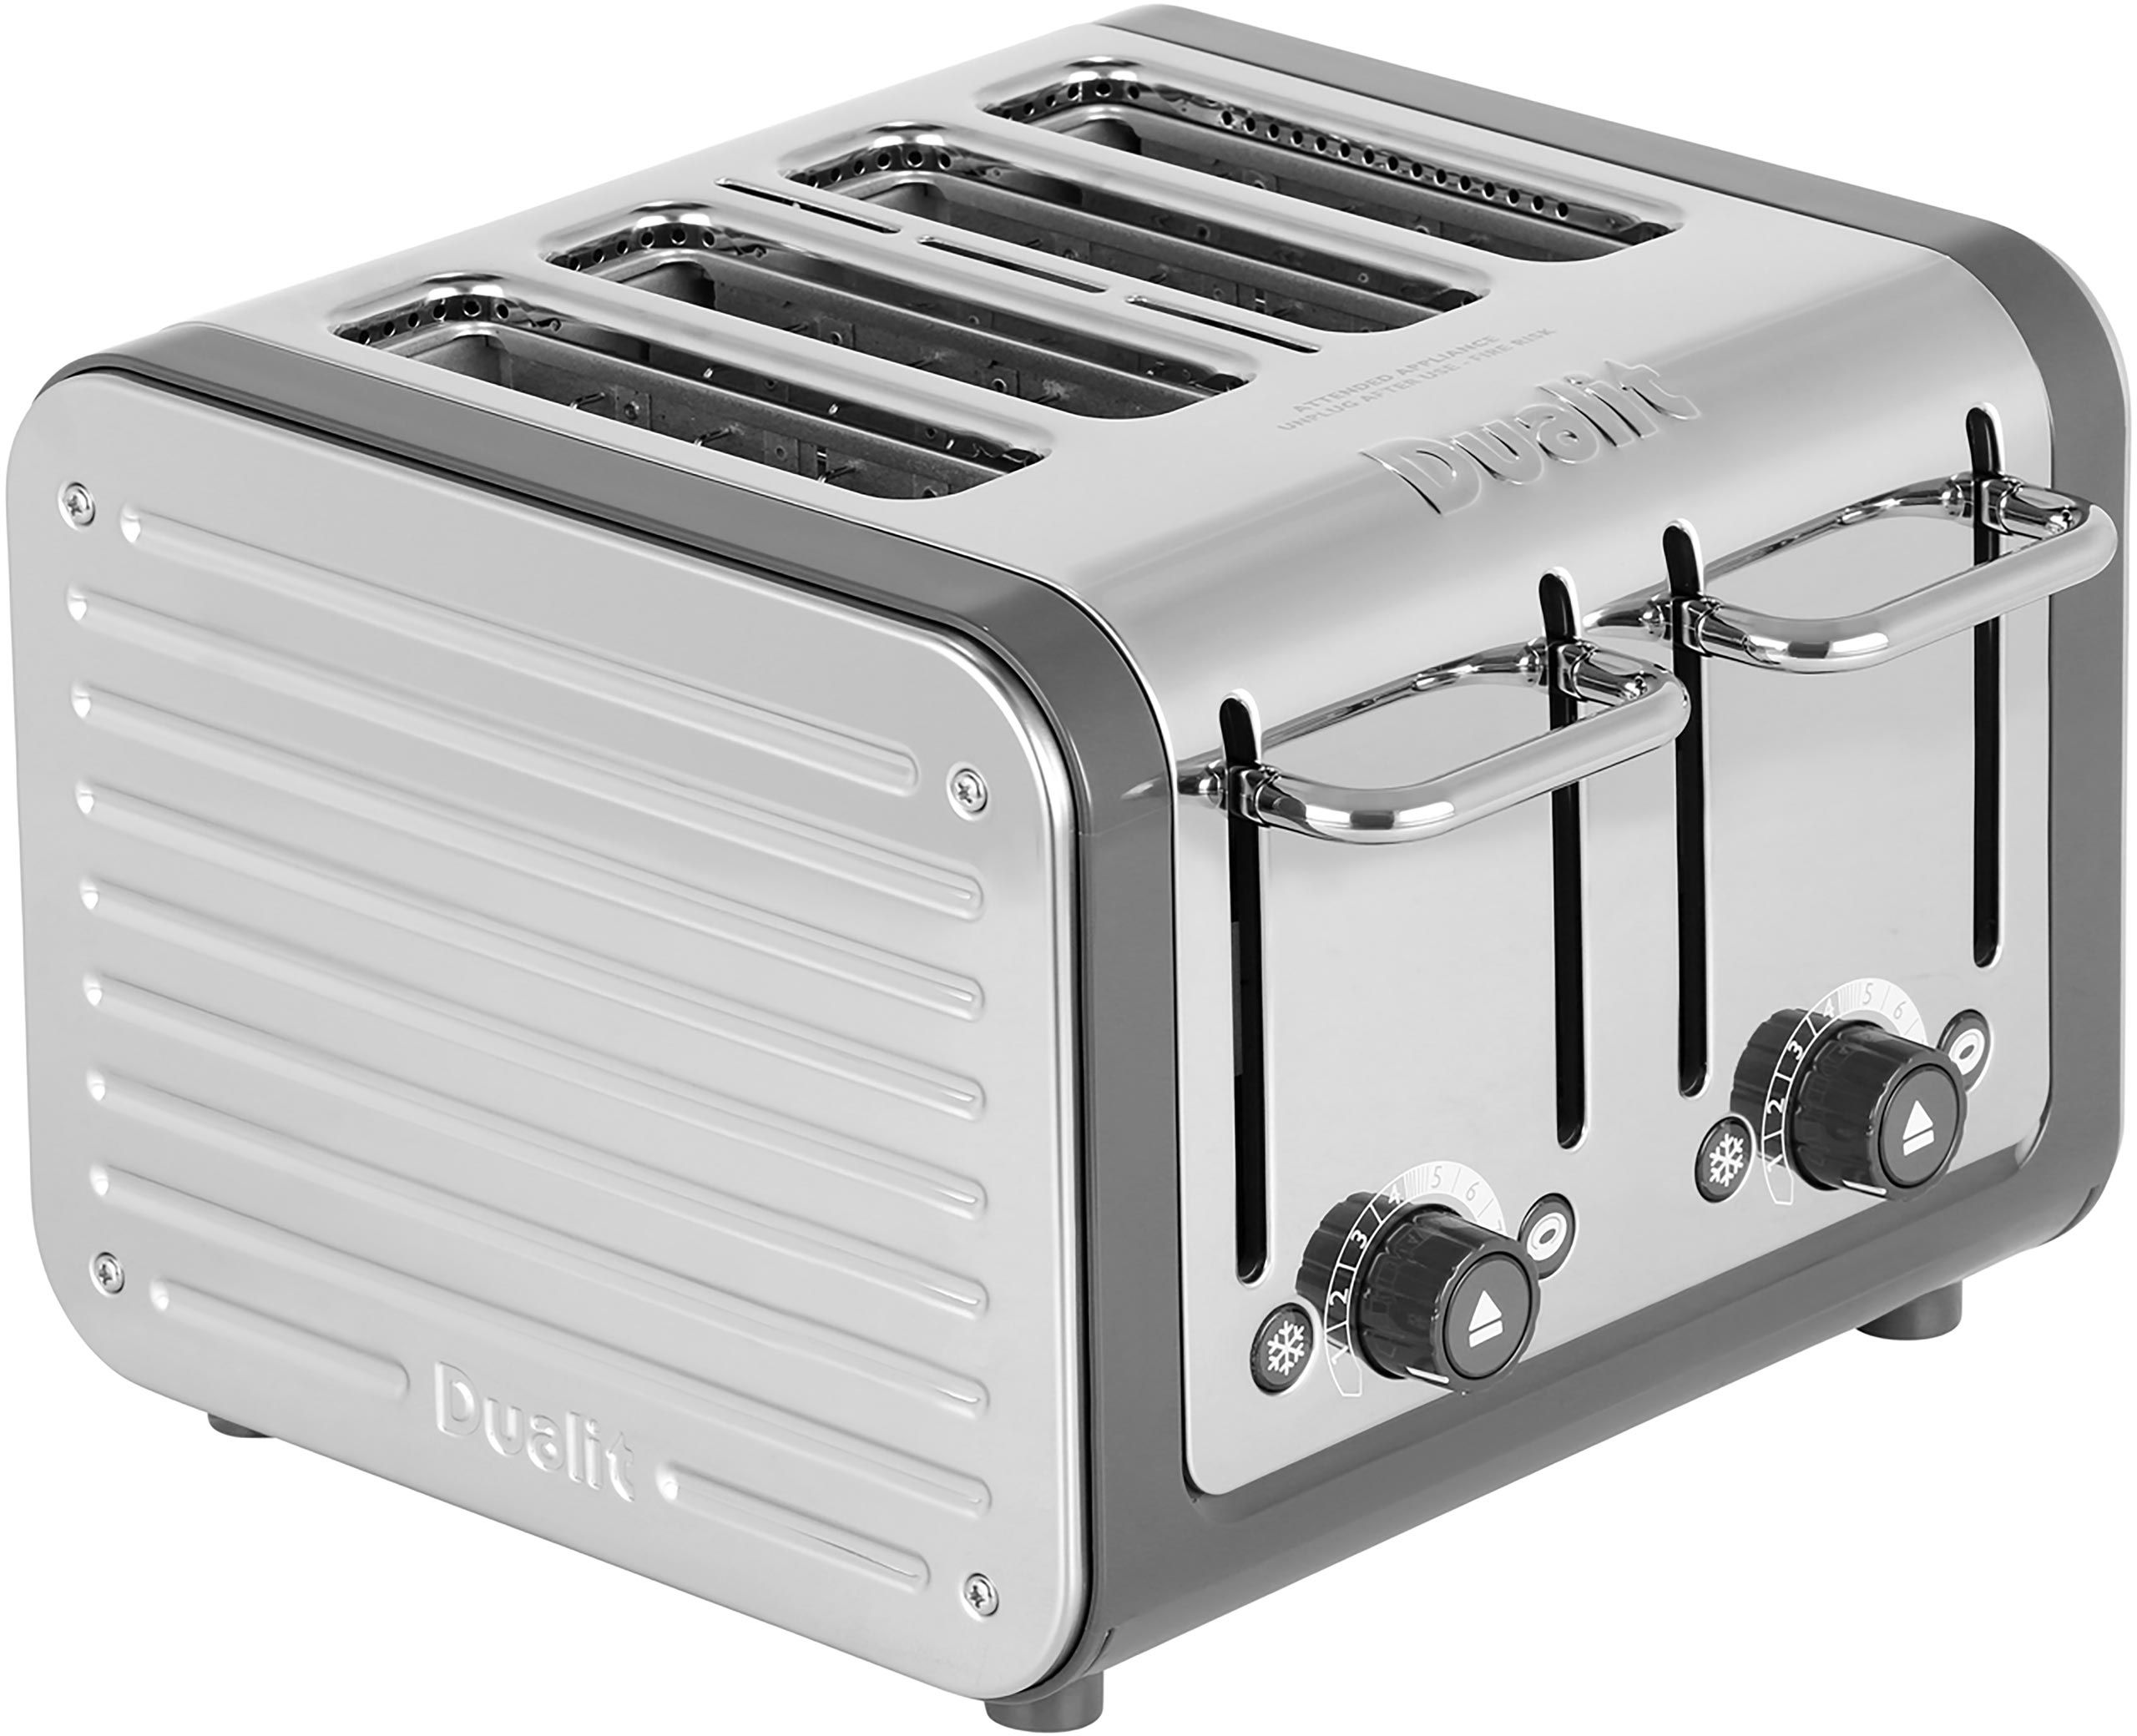 Dualit Architect 46526 4 Slice Toaster - Stainless Steel